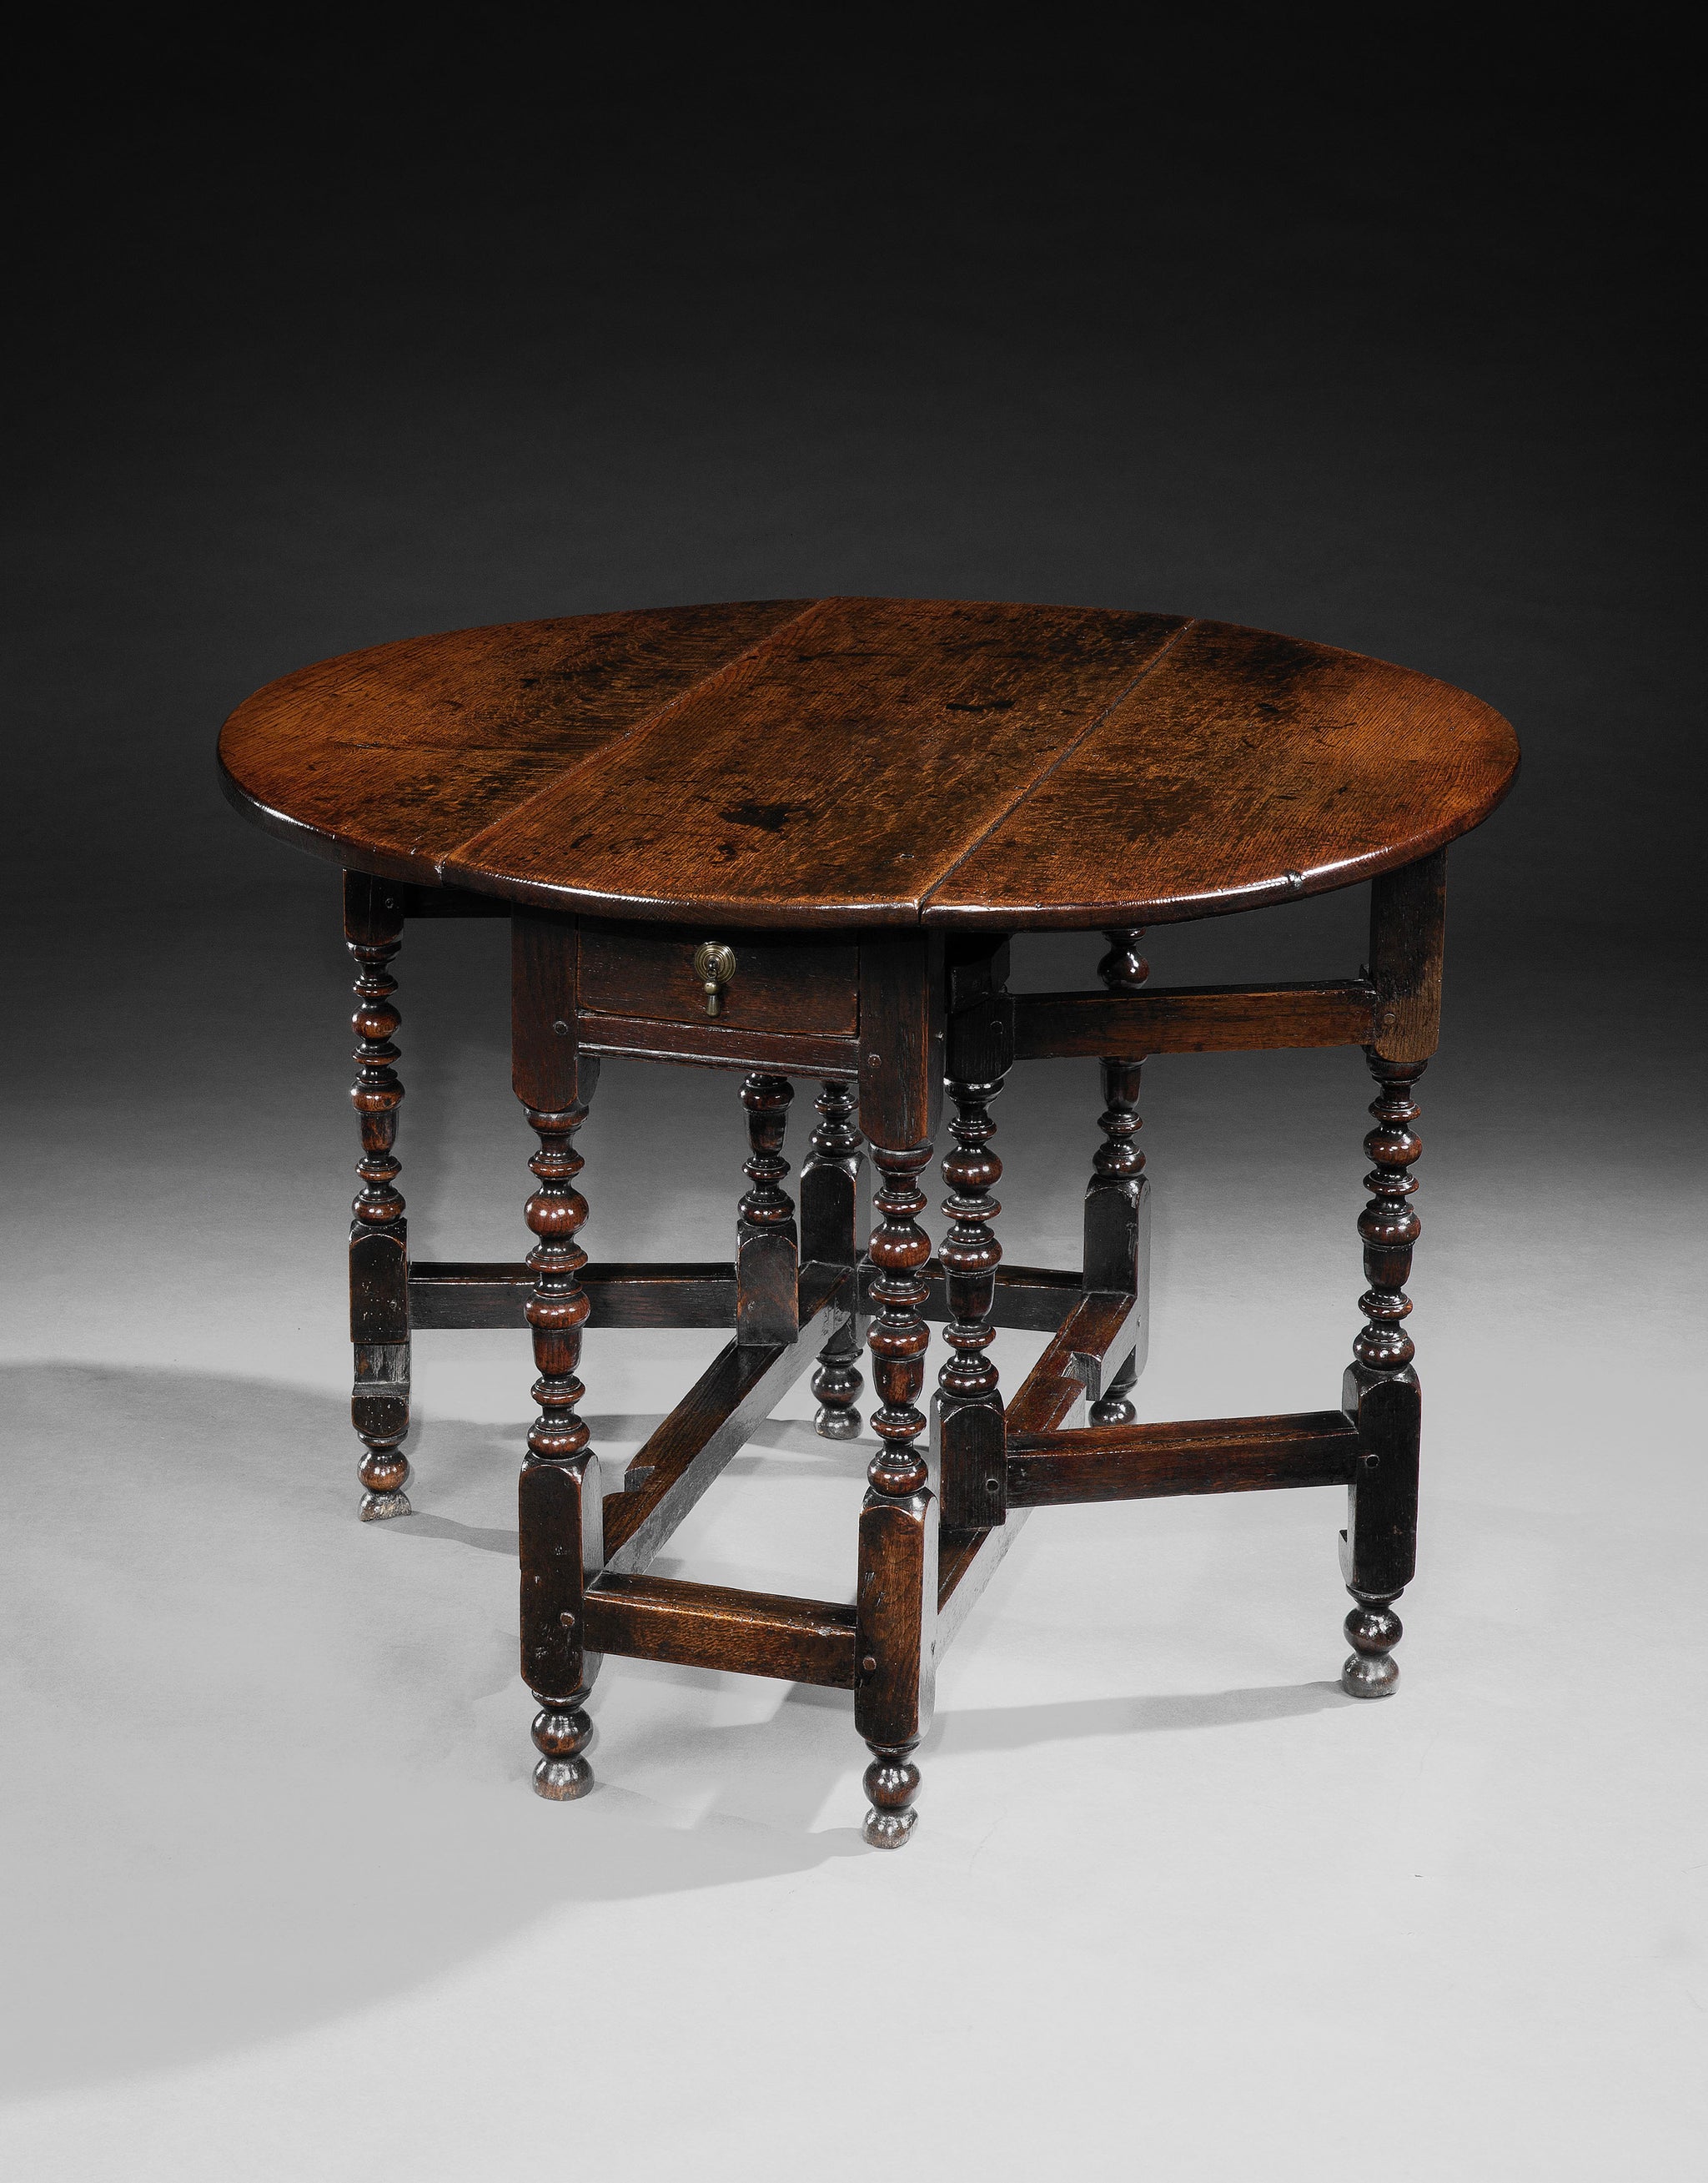 An Excellent William and Mary Oval Drop Leaf Table